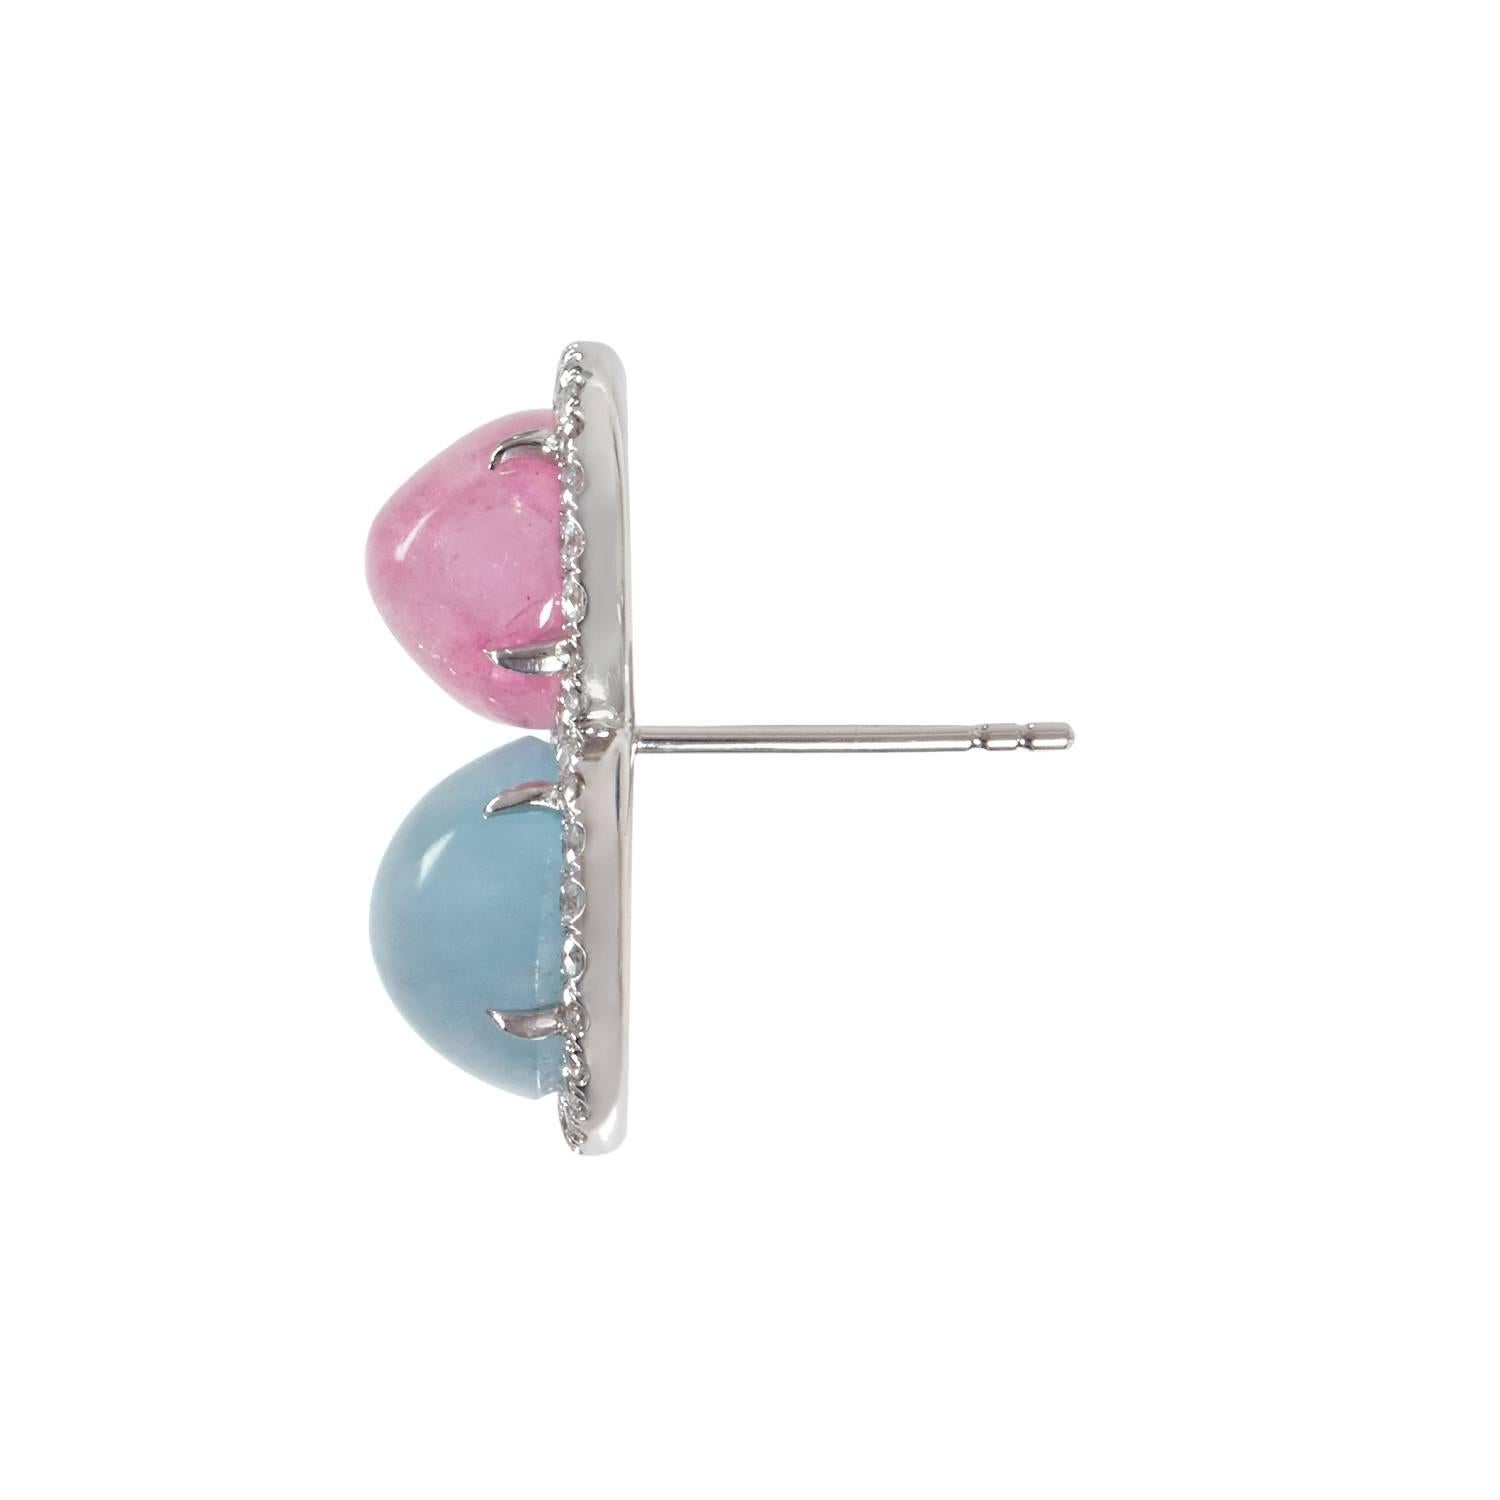 Lovely cabochon sugar pink tourmaline and aquamarine earring surrounded by brilliant cut diamonds. The post is in the middle of the earrings so you can wear them with the blue aquamarine up or down. The earring backs have a stabilizer circle which